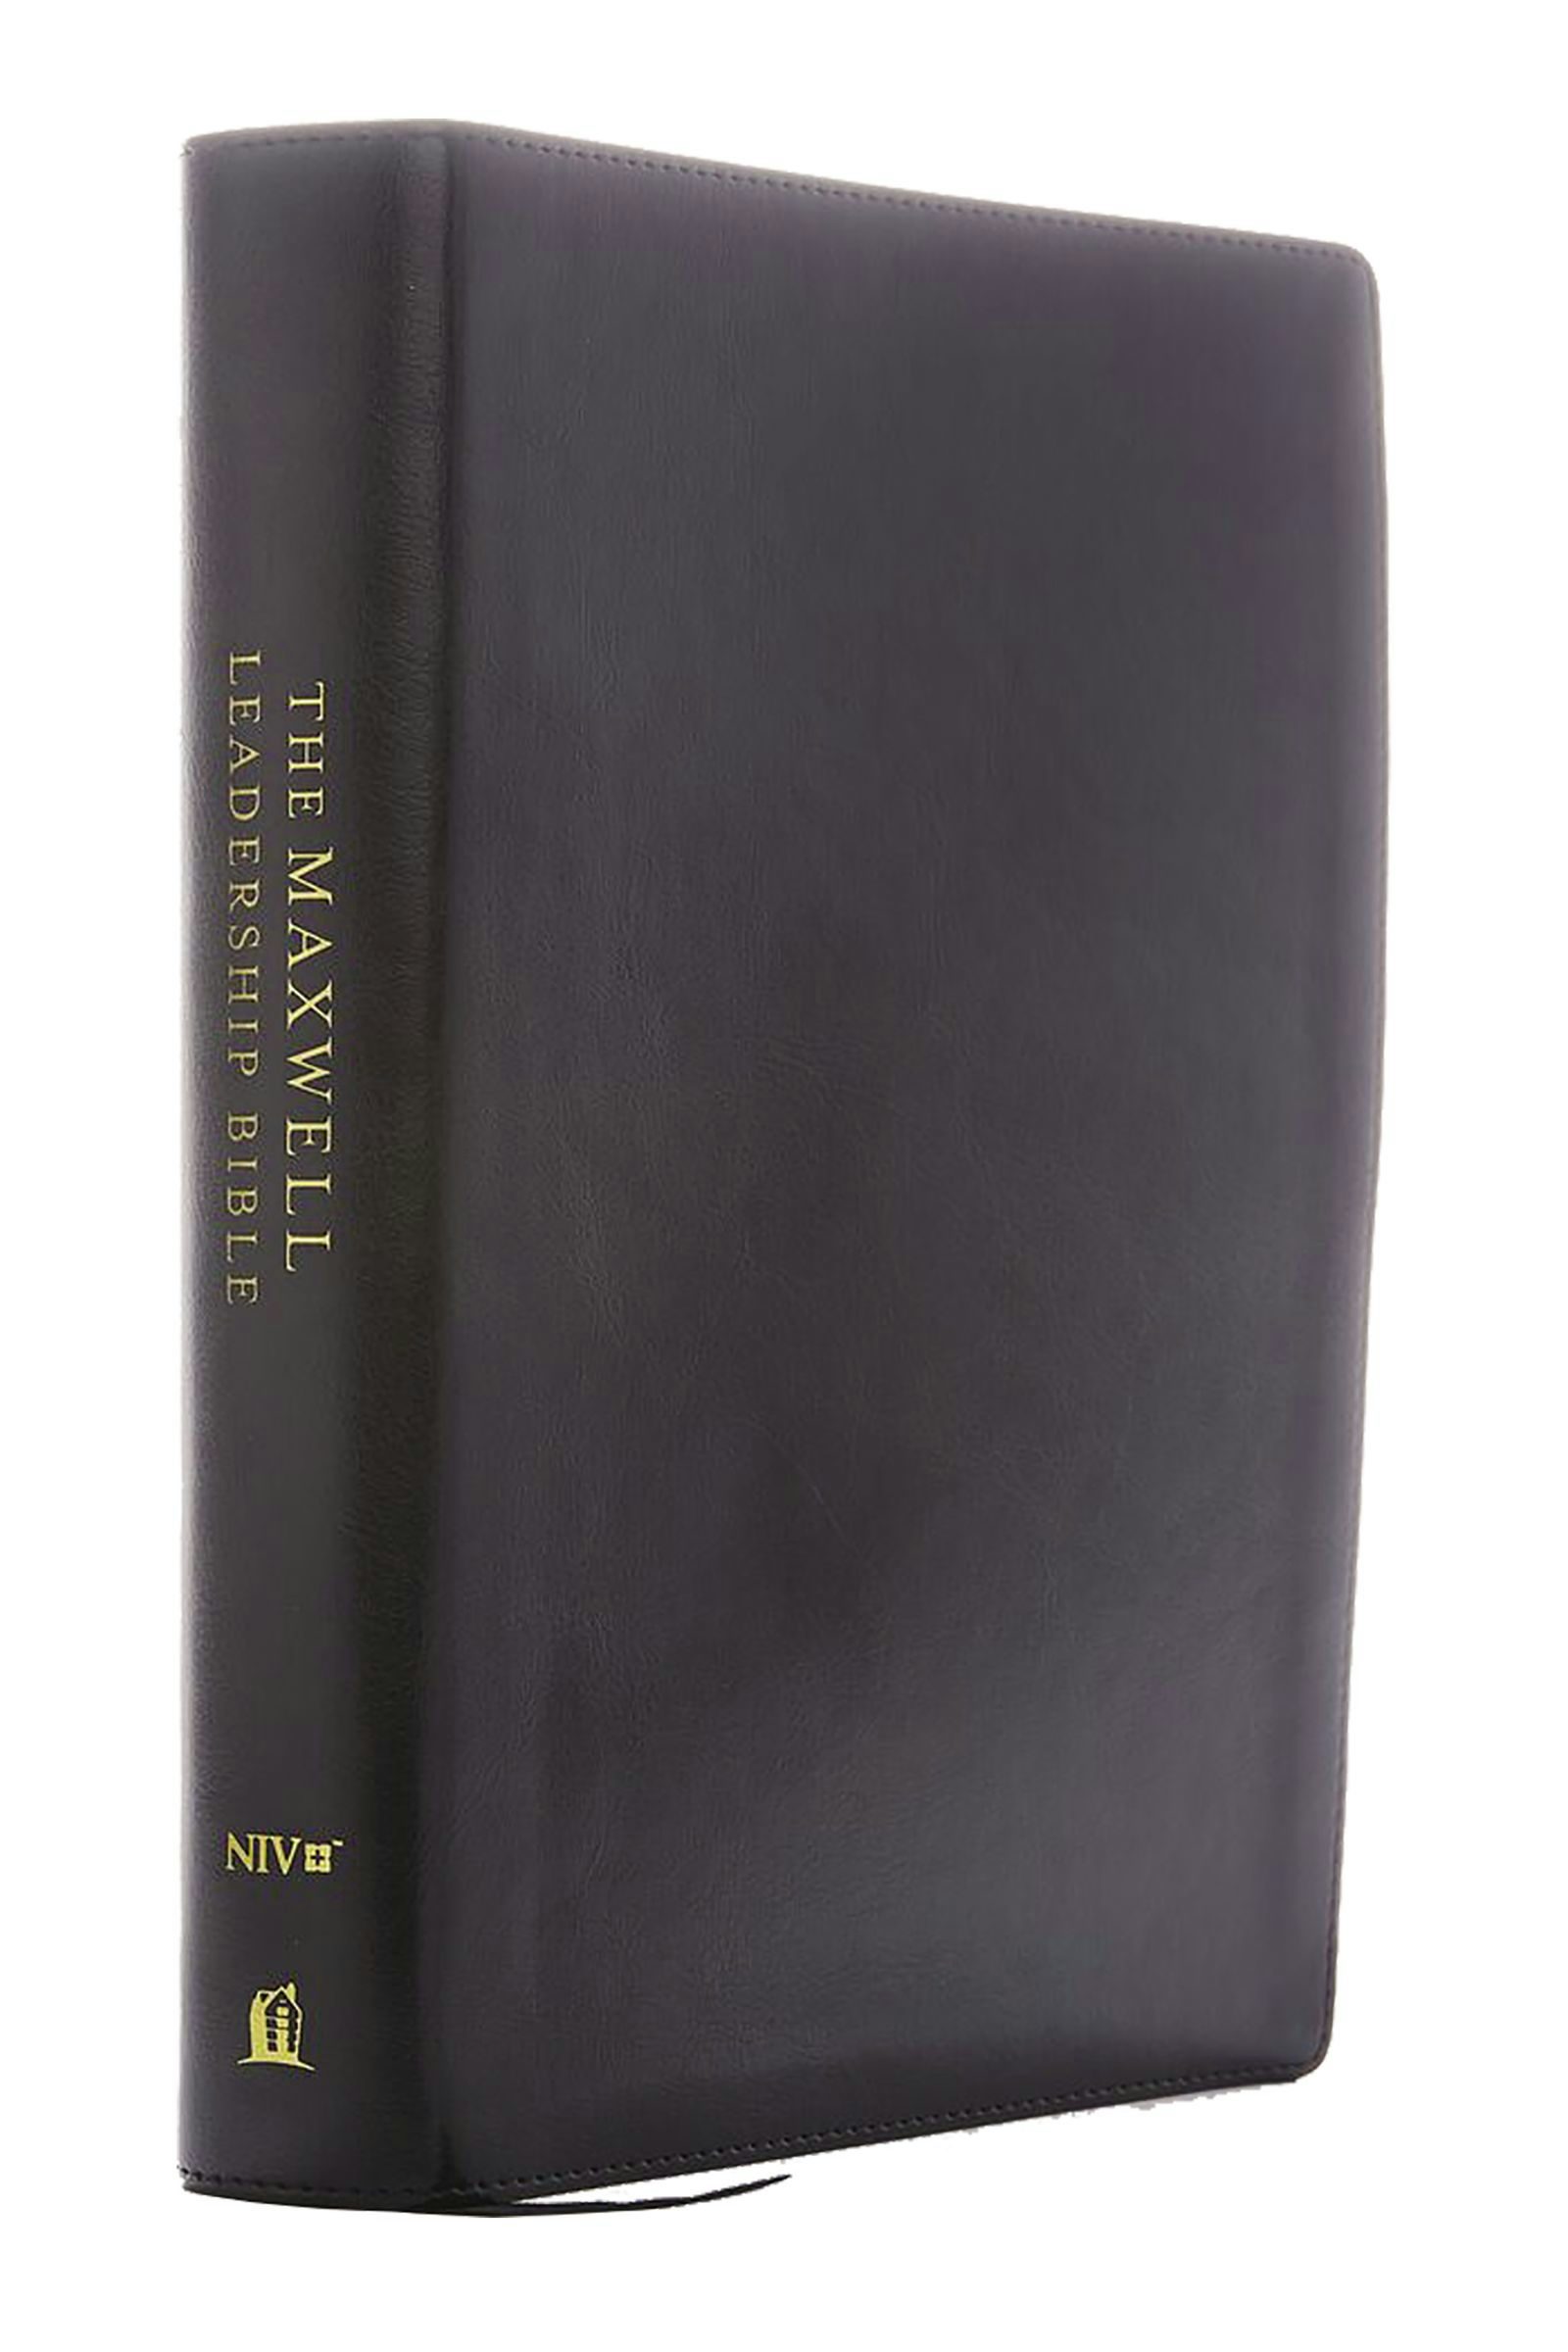 maxwell leadership bible takenote second edition